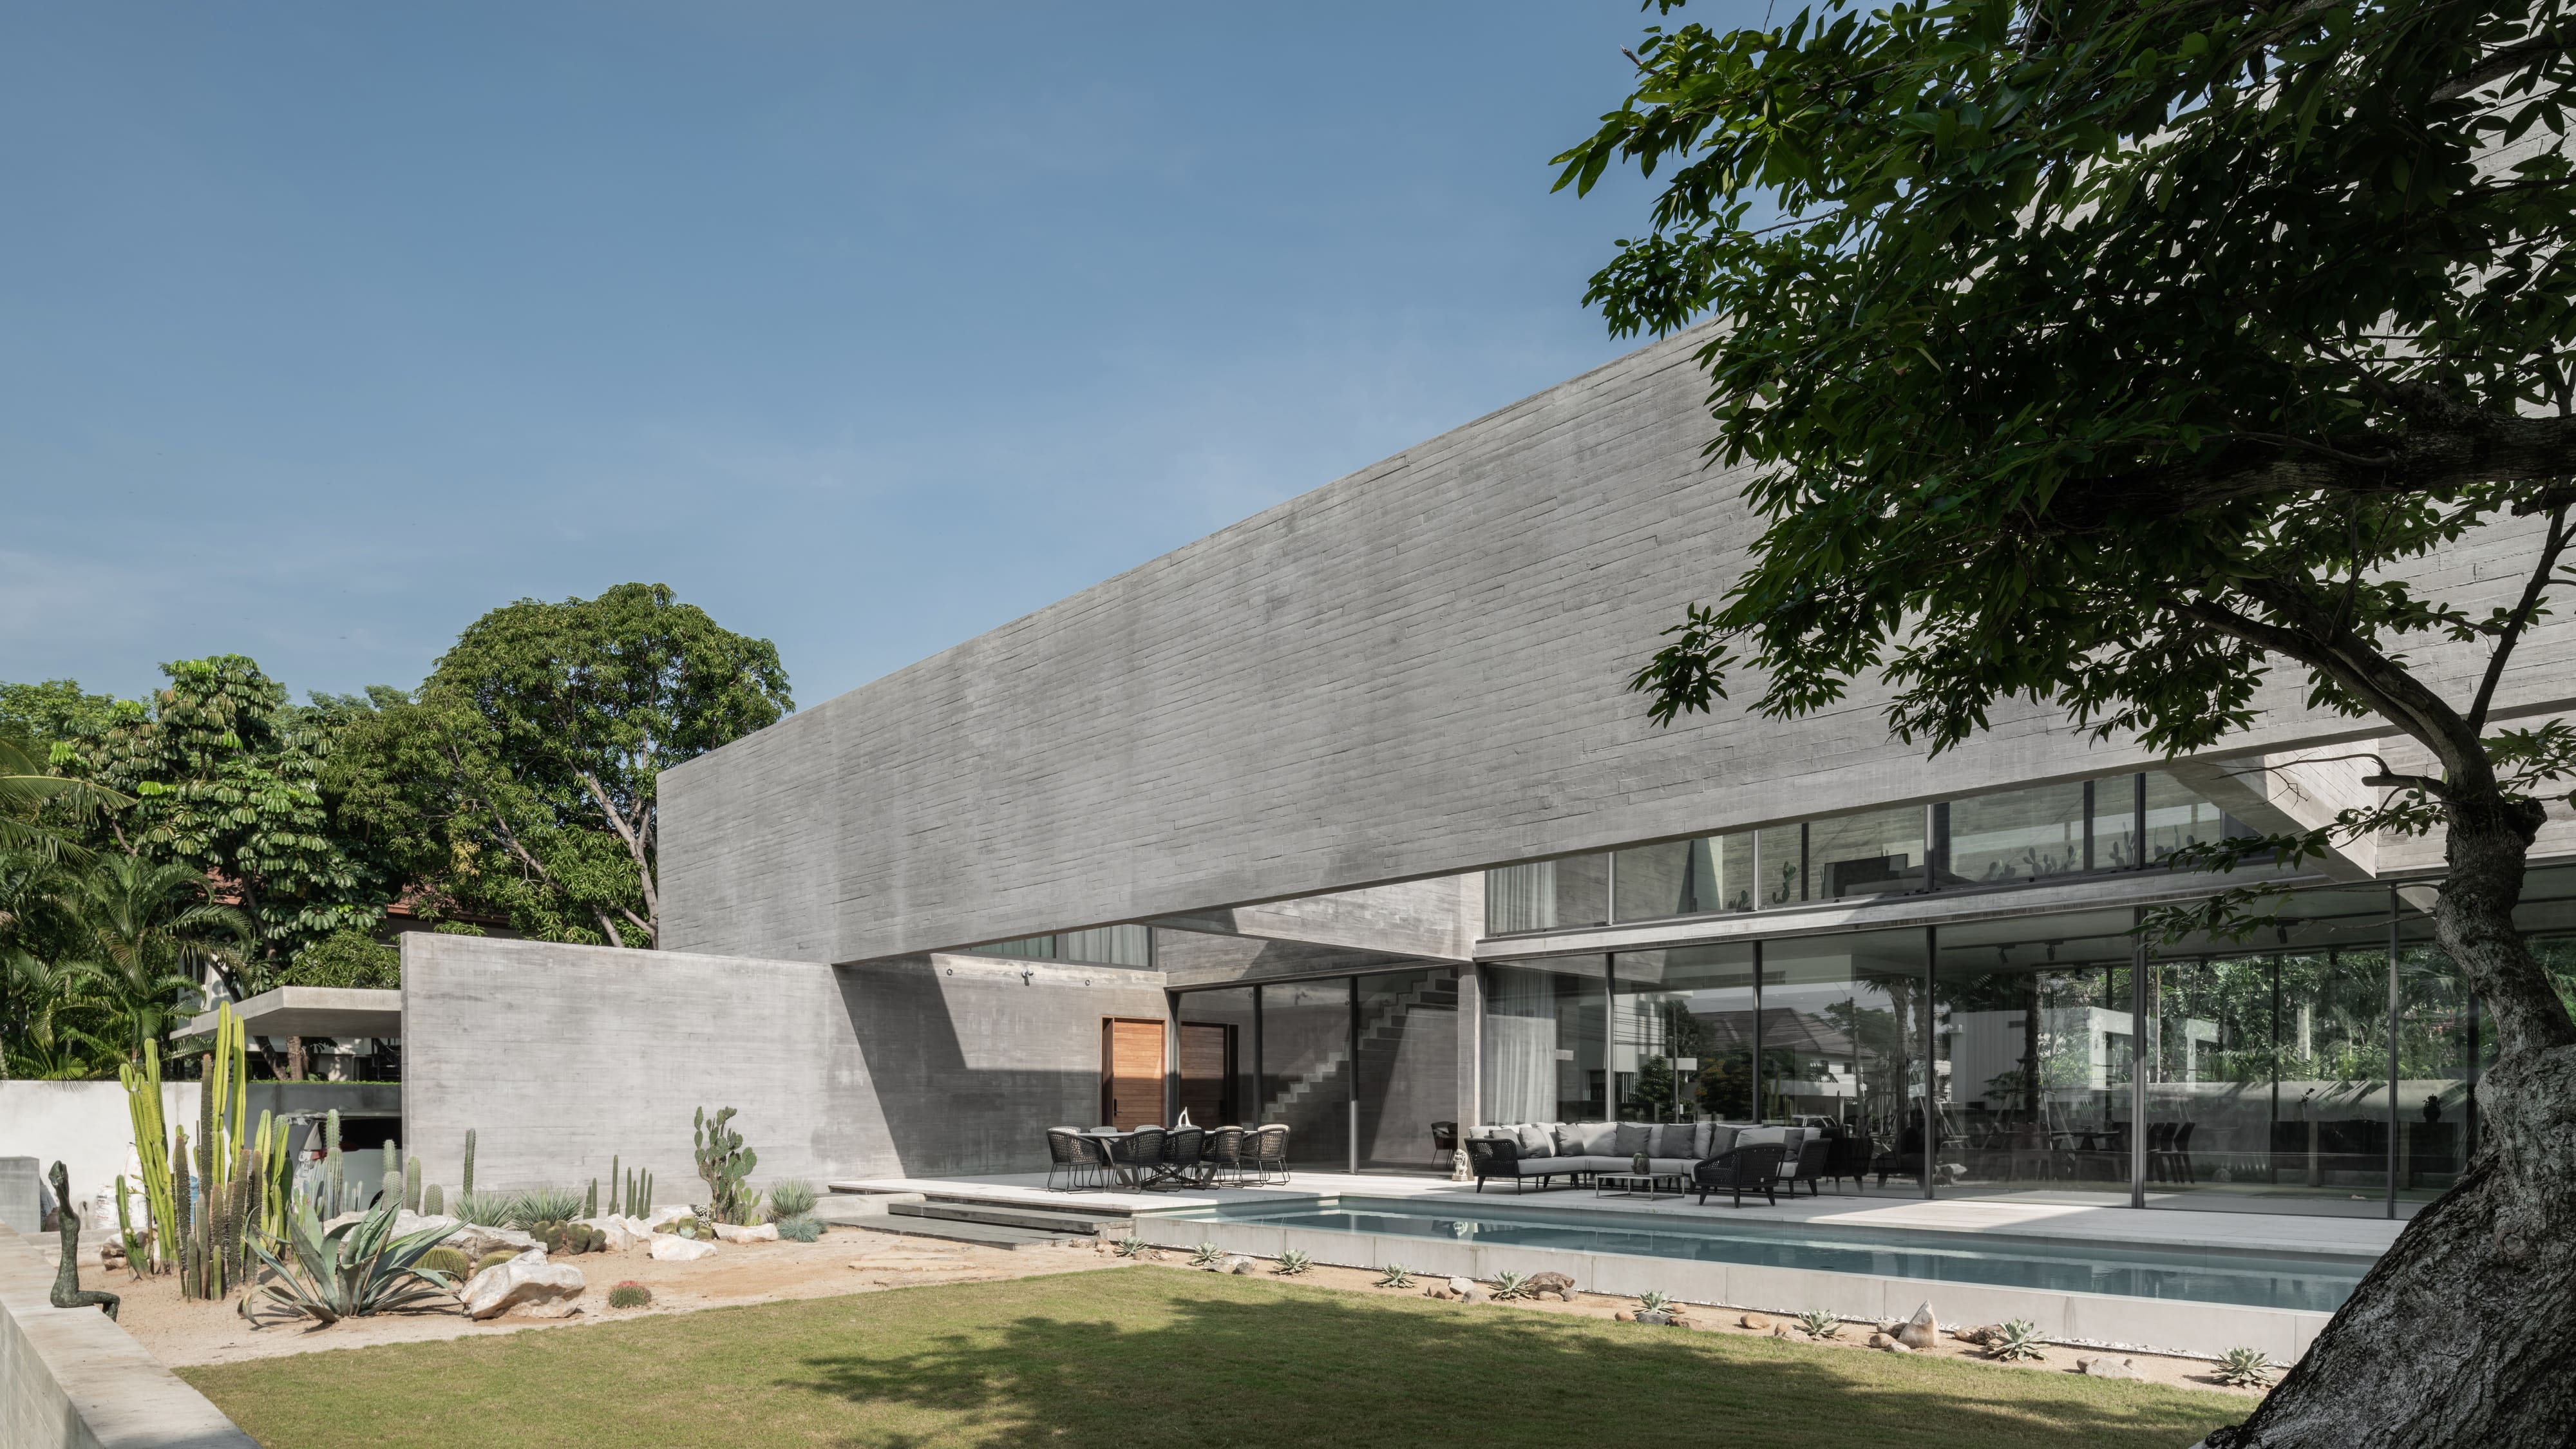 Casa de Alisa is a two-story house project by Stu/D/O that optimizes the potential of concrete in its design concept